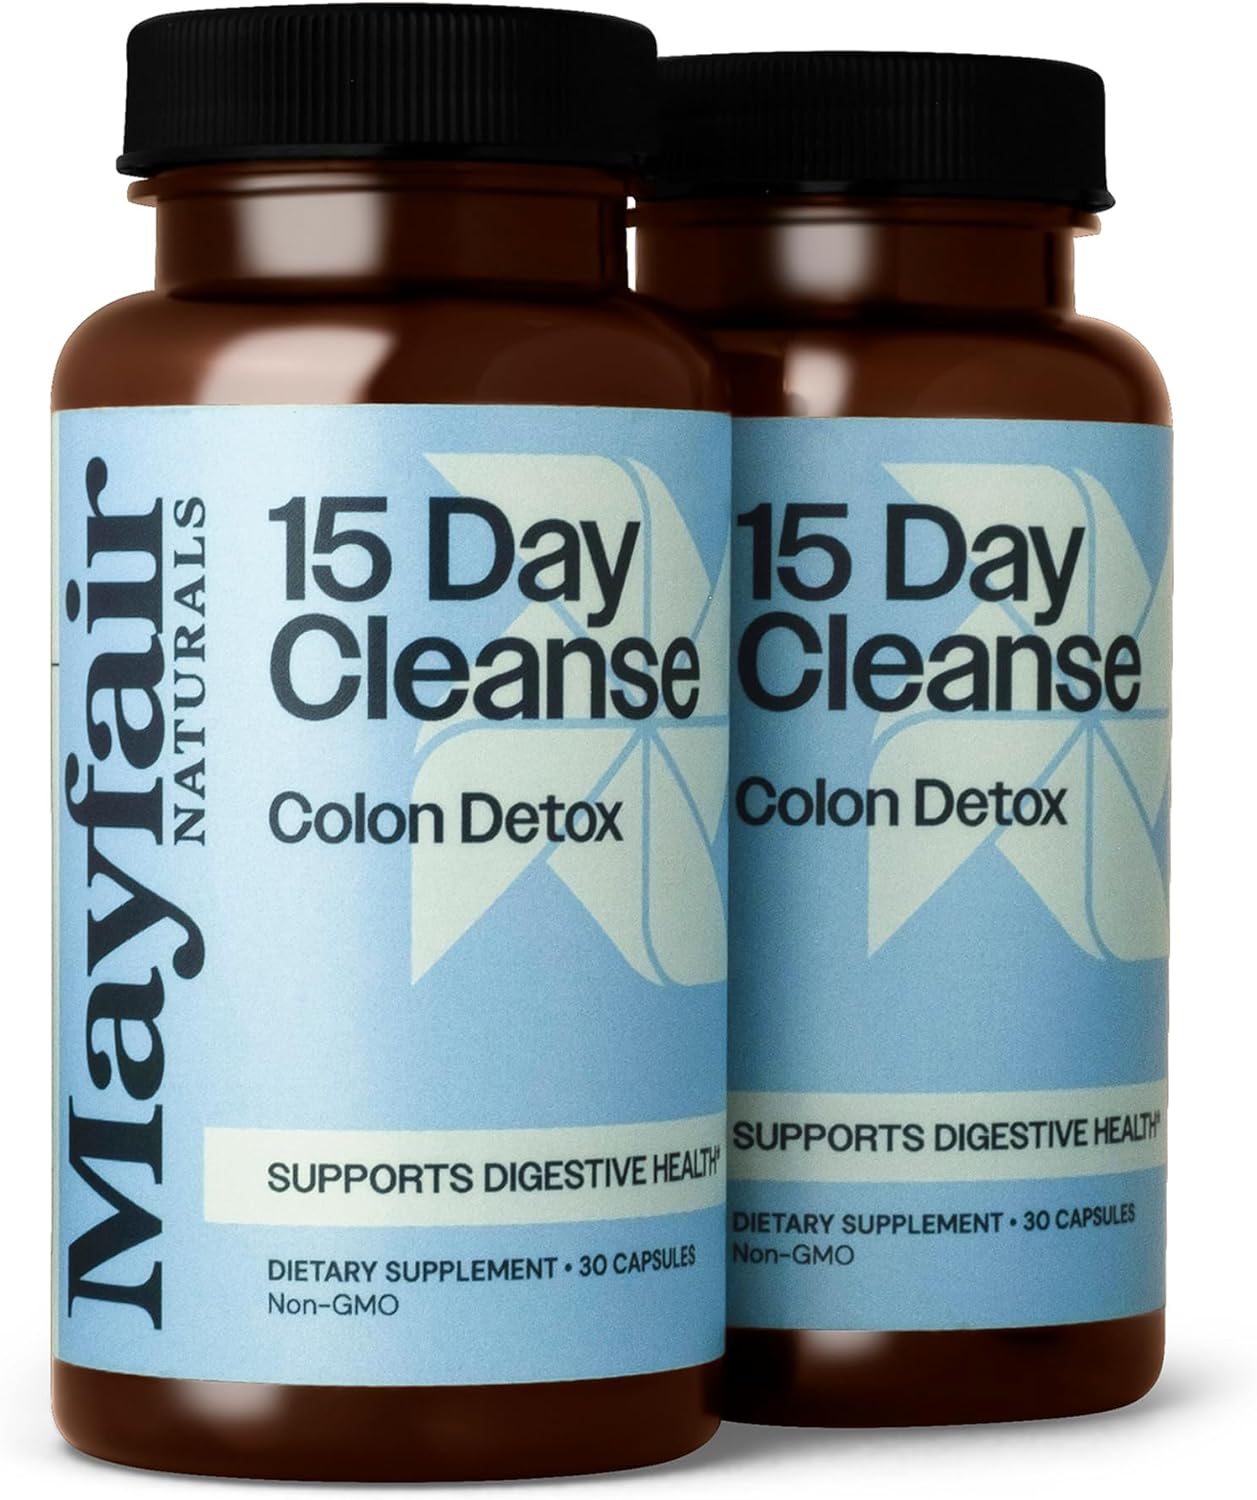 Mayfair Naturals 15 Day Cleanse Colon Detox, Dietary Supplement, 30 Capsules, Natural Laxative for Constipation and Digestive Health Supplement